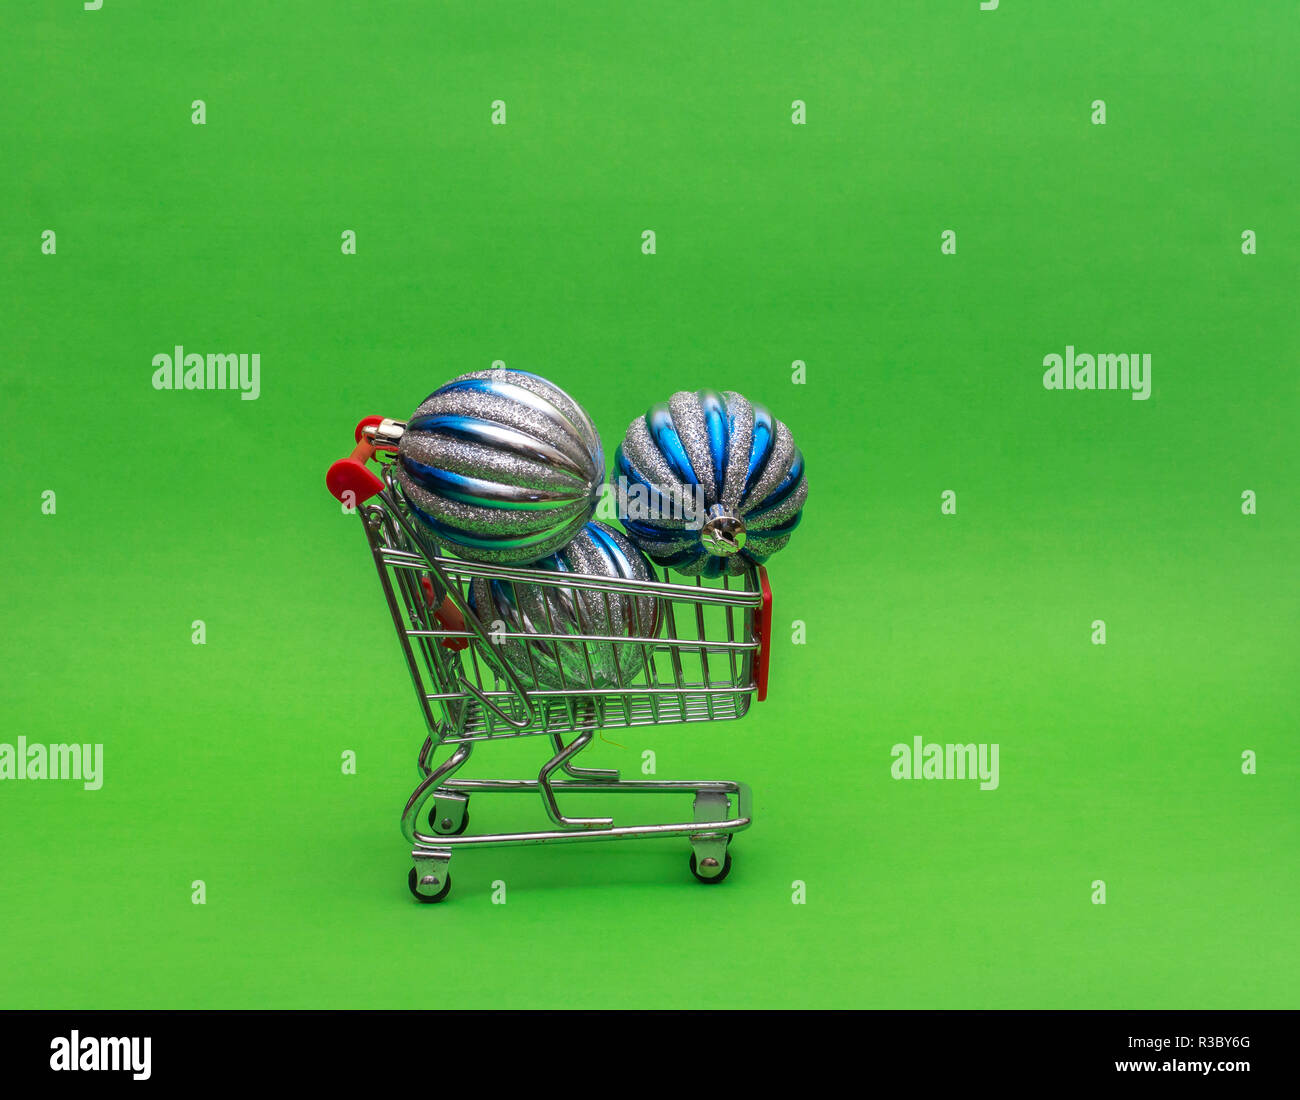 Shopping cart with blue globe ornaments, cristmas shopping Stock Photo